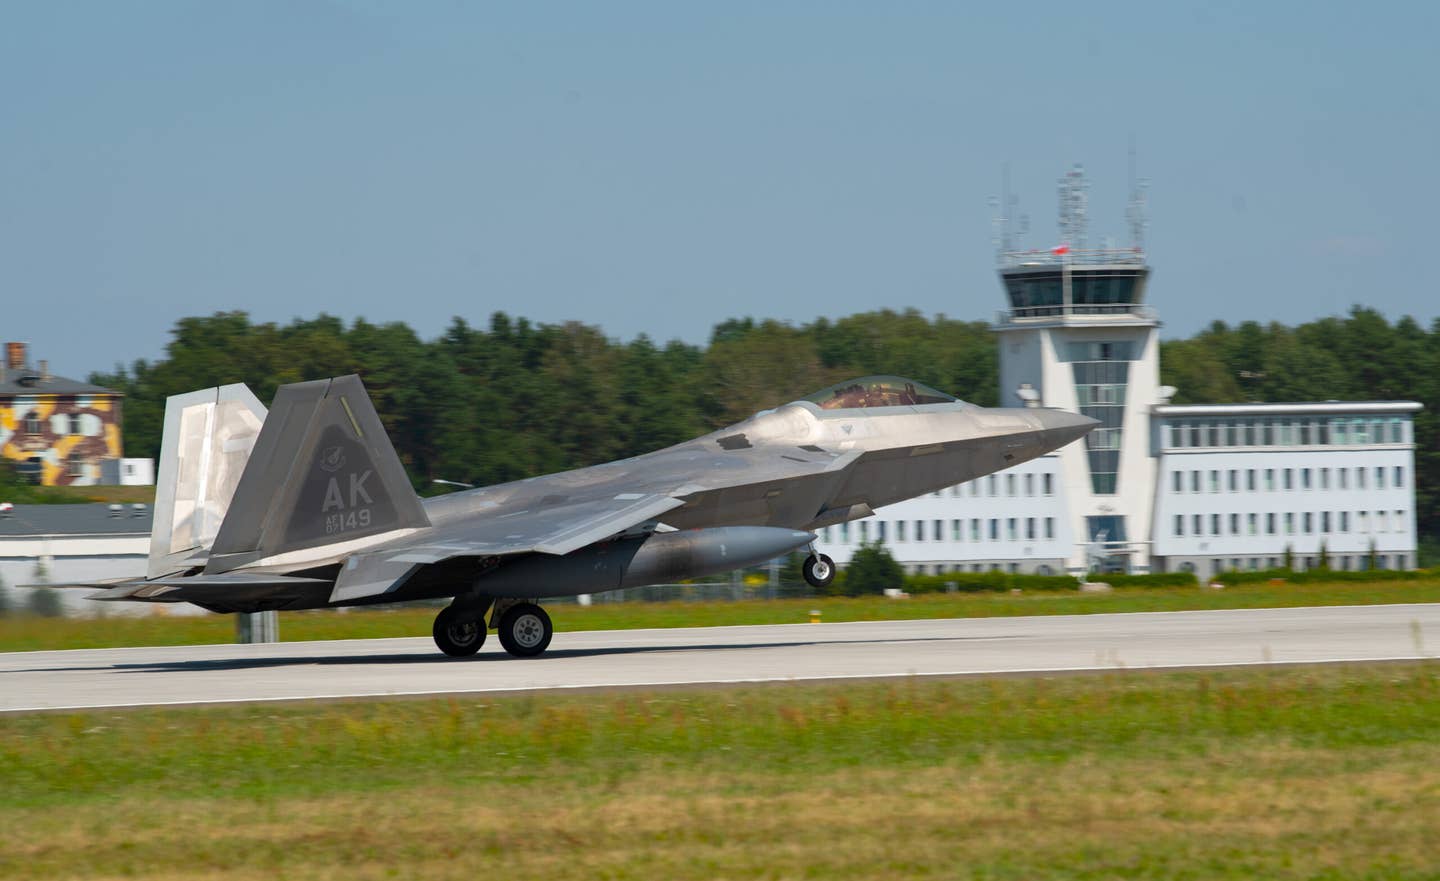 U.S. Air Force’s F-22 Raptor has arrived to the 32nd Tactical Air Base, Łask, Poland, to support NATO Air Shielding. <em>Credit: SSgt Danielle Sukhlall/U.S. Air Force</em>